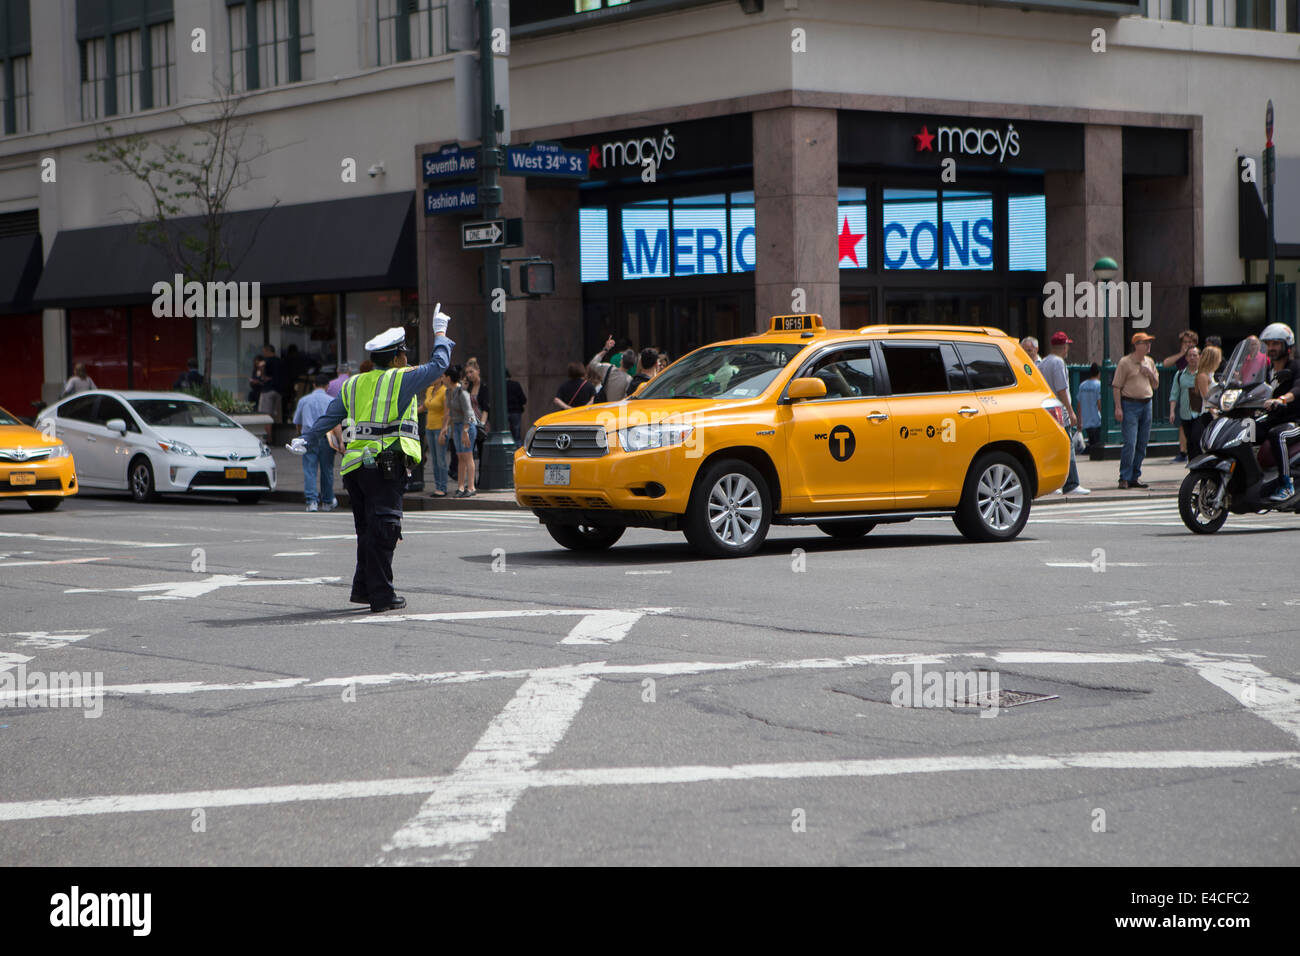 A police woman directs traffic at a busy intersection in the New York City borough of Manhattan, NY Stock Photo